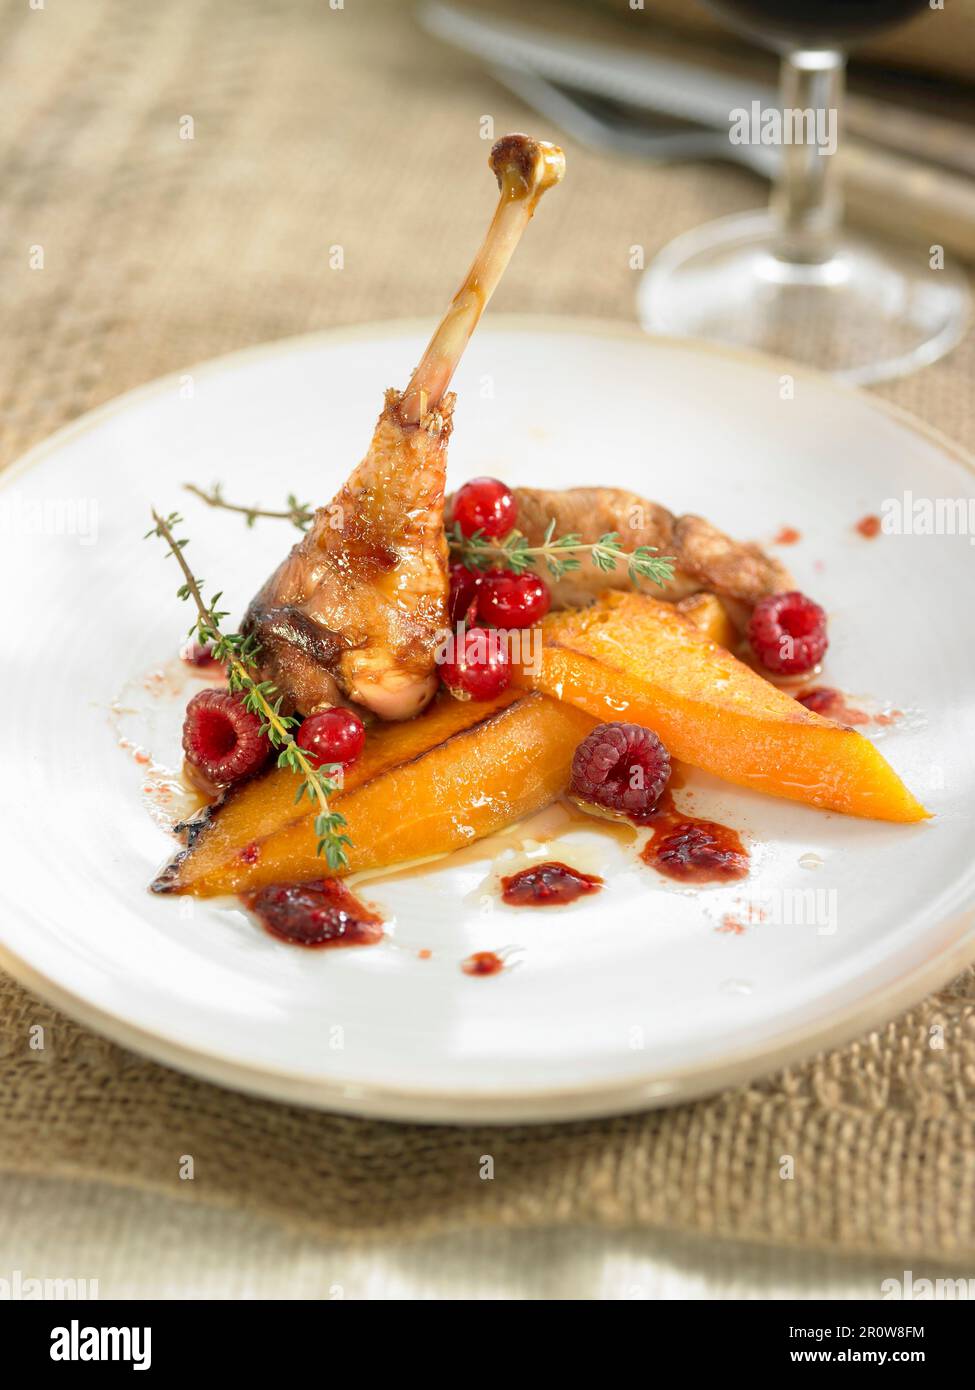 Pheasant with stewed pumpkin and summer fruit Stock Photo